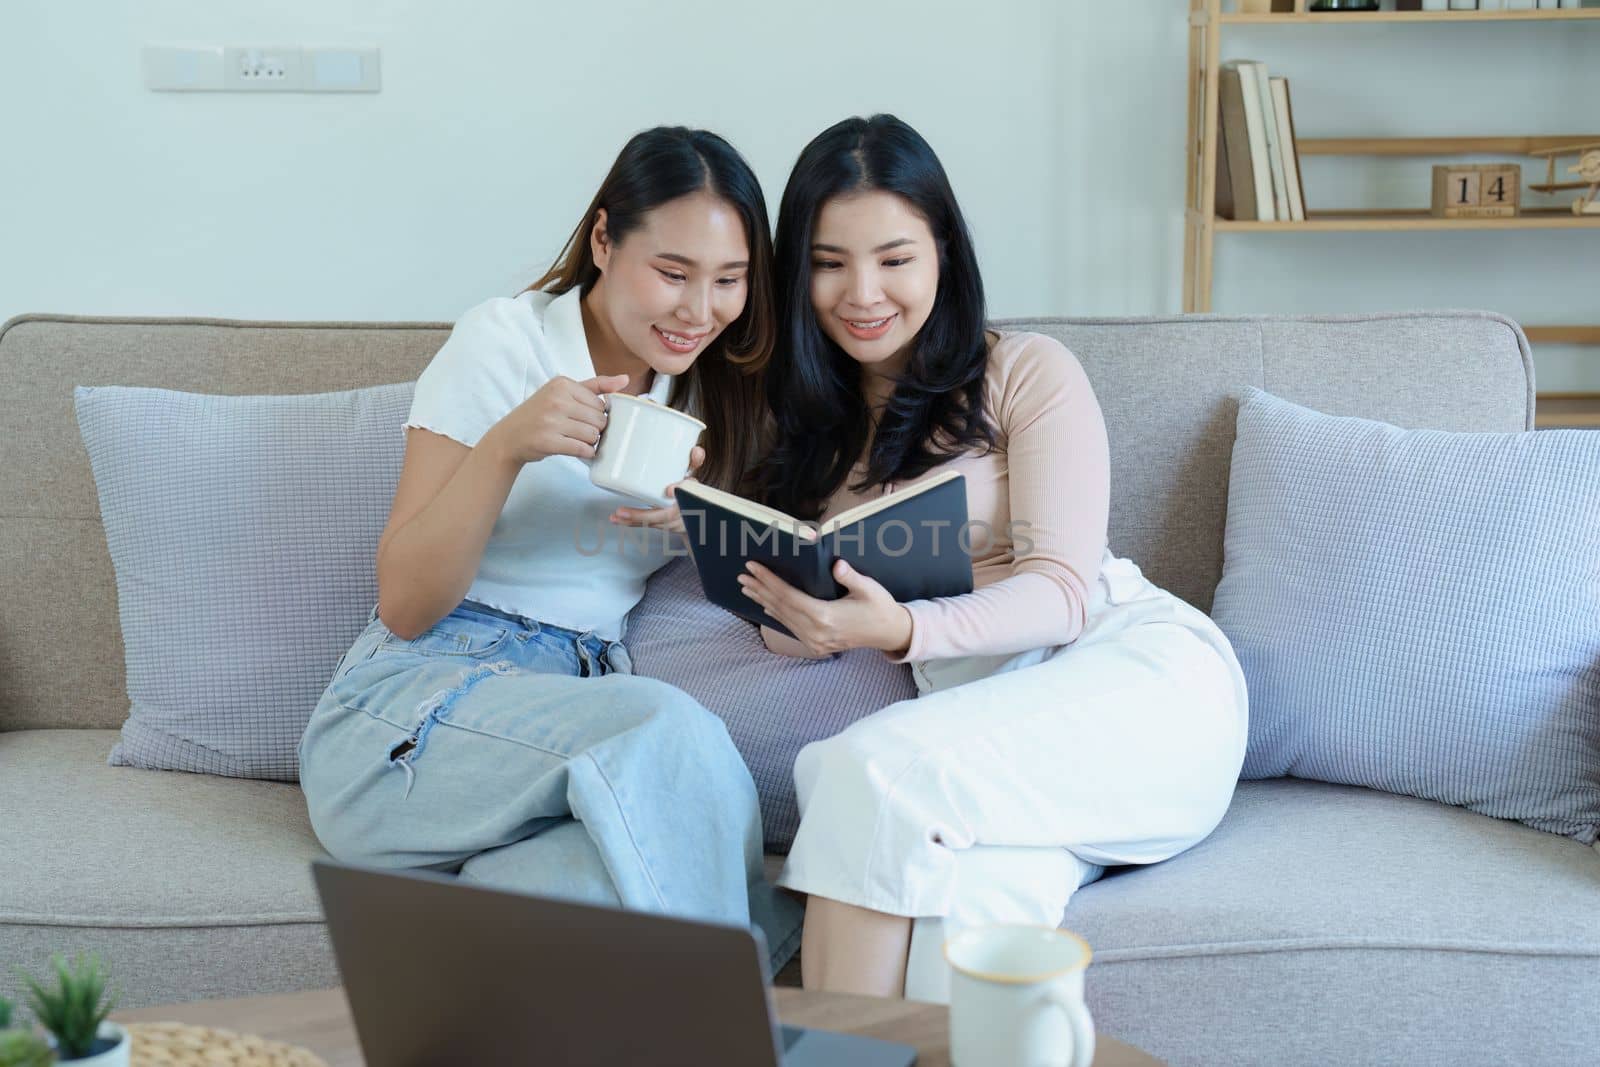 lgbtq, LGBT concept, homosexuality, portrait of two Asian women posing happy together and showing love for each other while having coffee at the dining table by Manastrong